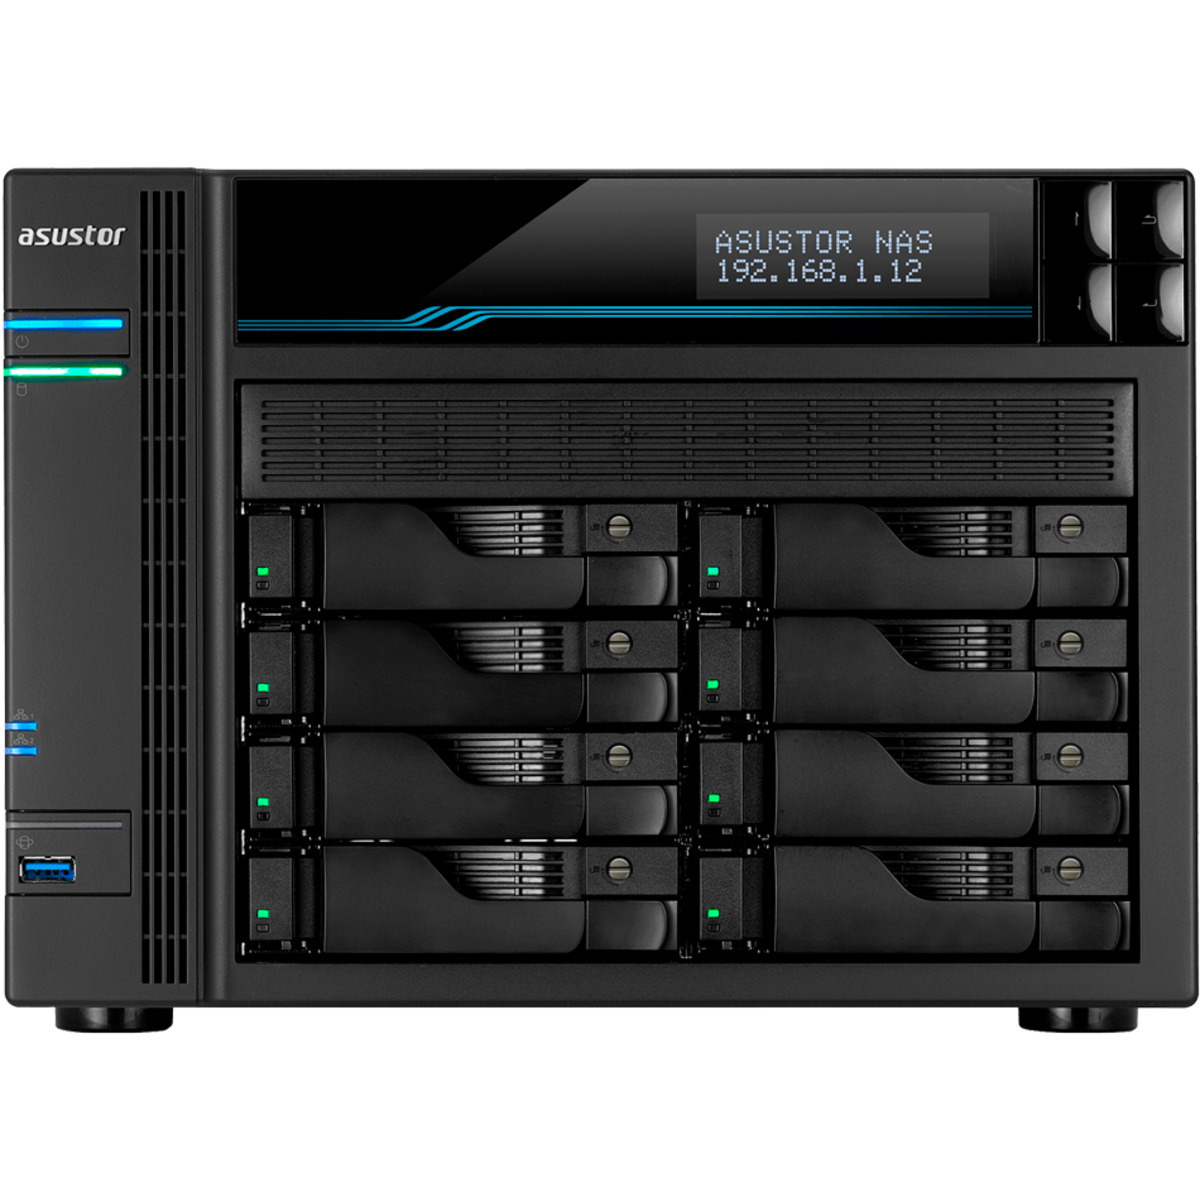 ASUSTOR AS6508T Lockerstor 8 16tb 8-Bay Desktop Multimedia / Power User / Business NAS - Network Attached Storage Device 8x2tb Sandisk Ultra 3D SDSSDH3-2T00 2.5 560/520MB/s SATA 6Gb/s SSD CONSUMER Class Drives Installed - Burn-In Tested - ON SALE - FREE RAM UPGRADE AS6508T Lockerstor 8